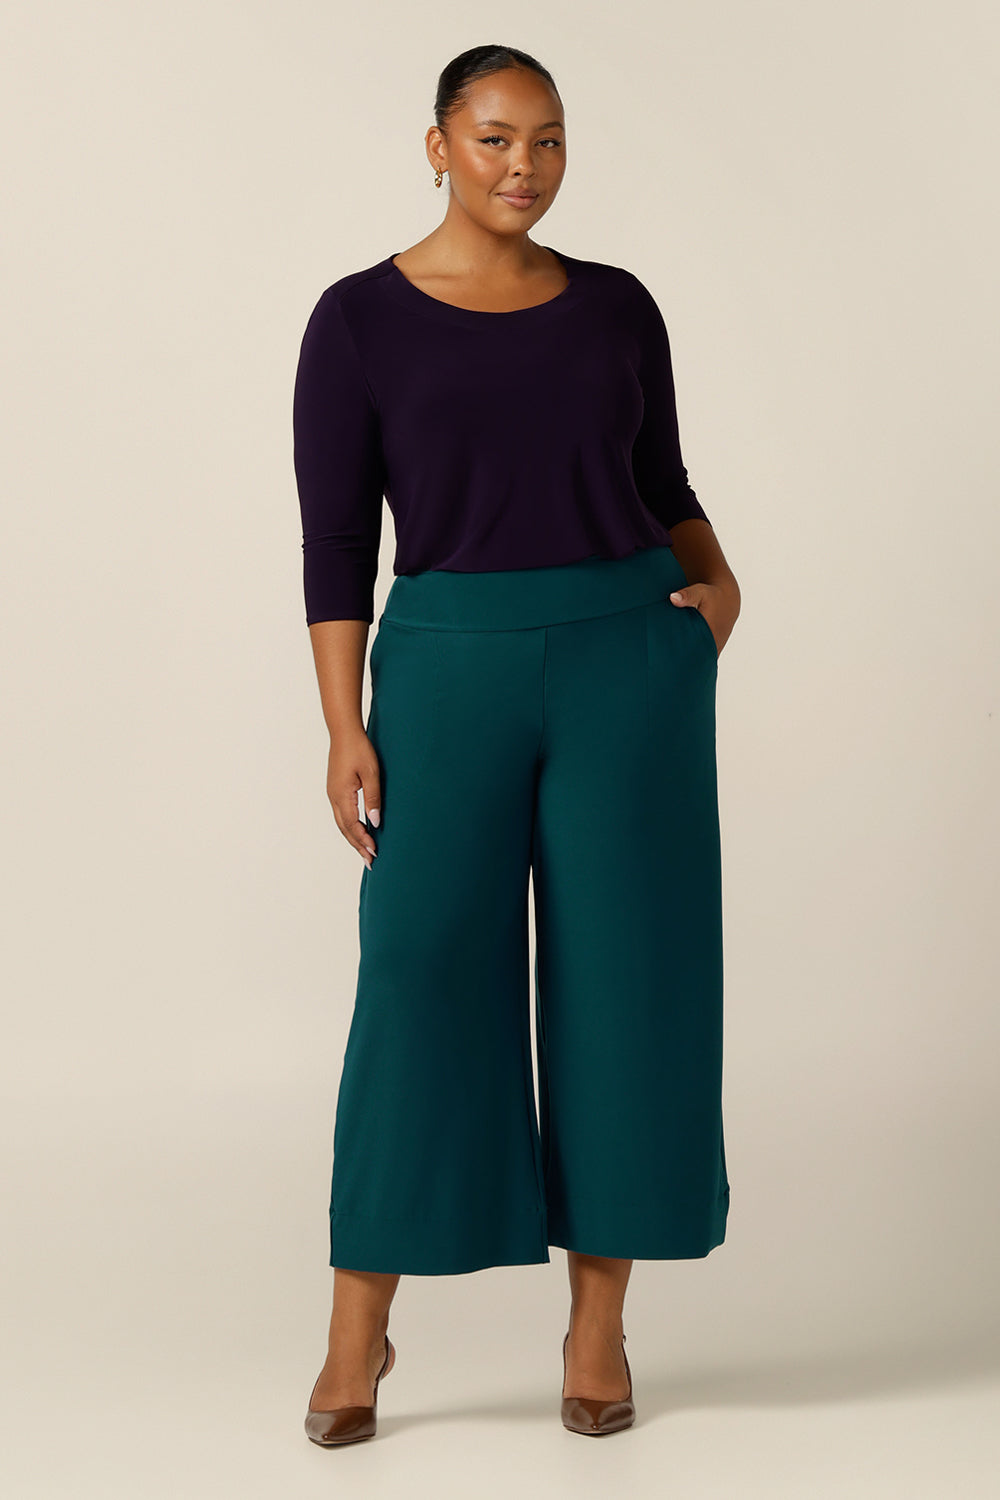 A plus size 18 woman wears Petrol green, wide leg, cropped length, pull on pants by Australian and New Zealand women's clothing brand, L&F. Featuring a pull-on waistband, these stretch jersey trousers are good pants for comfortable corporate wear.